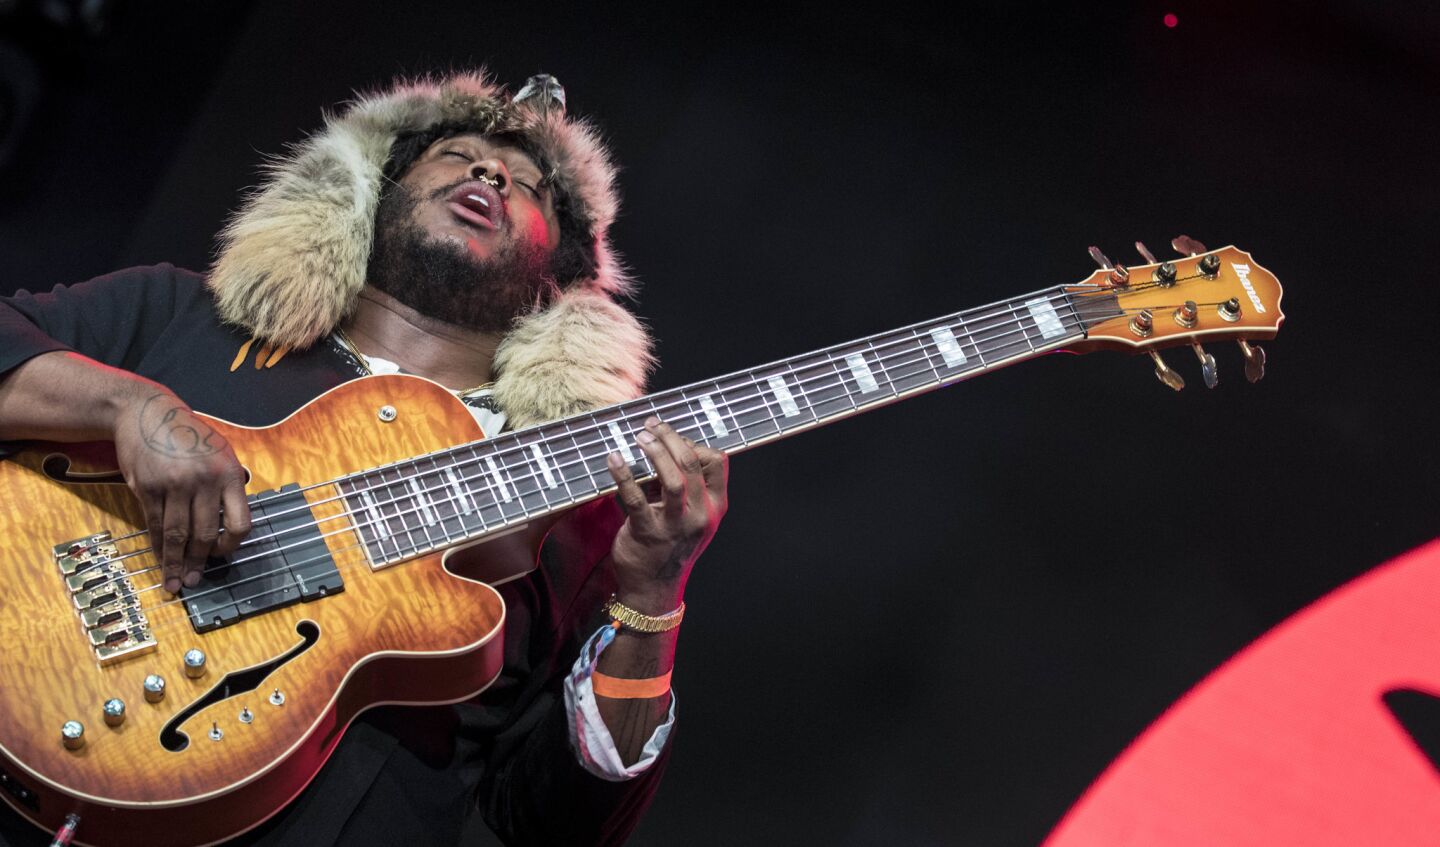 INDIO, CALIF. -- SATURDAY, APRIL 15, 2017: Bassist/songwriter/vocalist Stephen Bruner AKA Thundercat on the Mojave stage at the Coachella Music and Arts Festival in Indio, Calif., on April 15, 2017. (Brian van der Brug / Los Angeles Times)